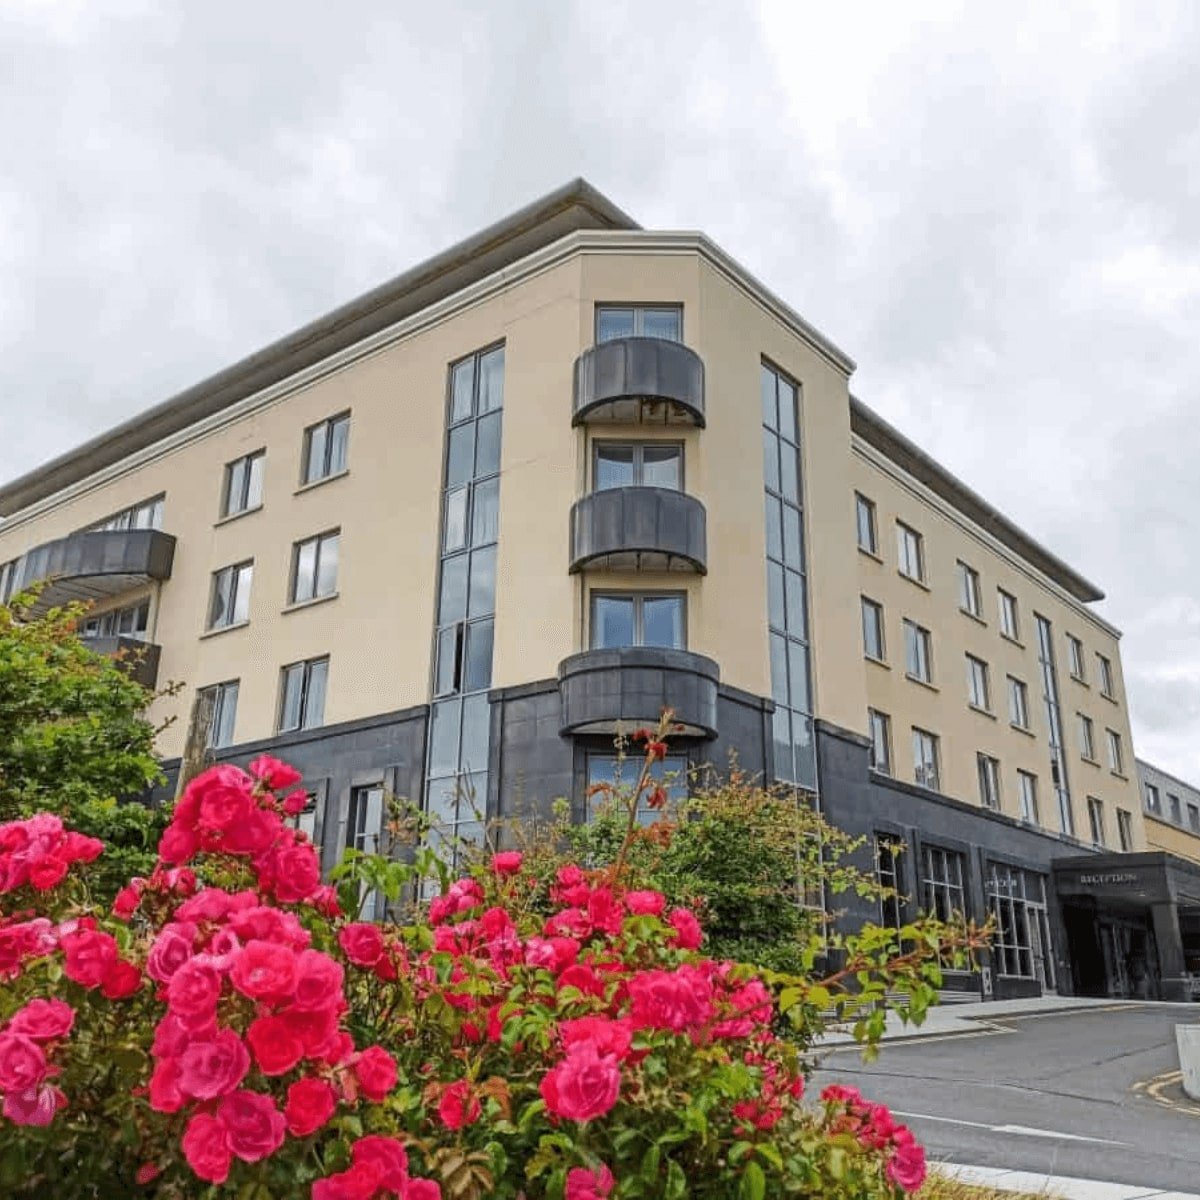 The exterior of the salthill hotel with flowers outside